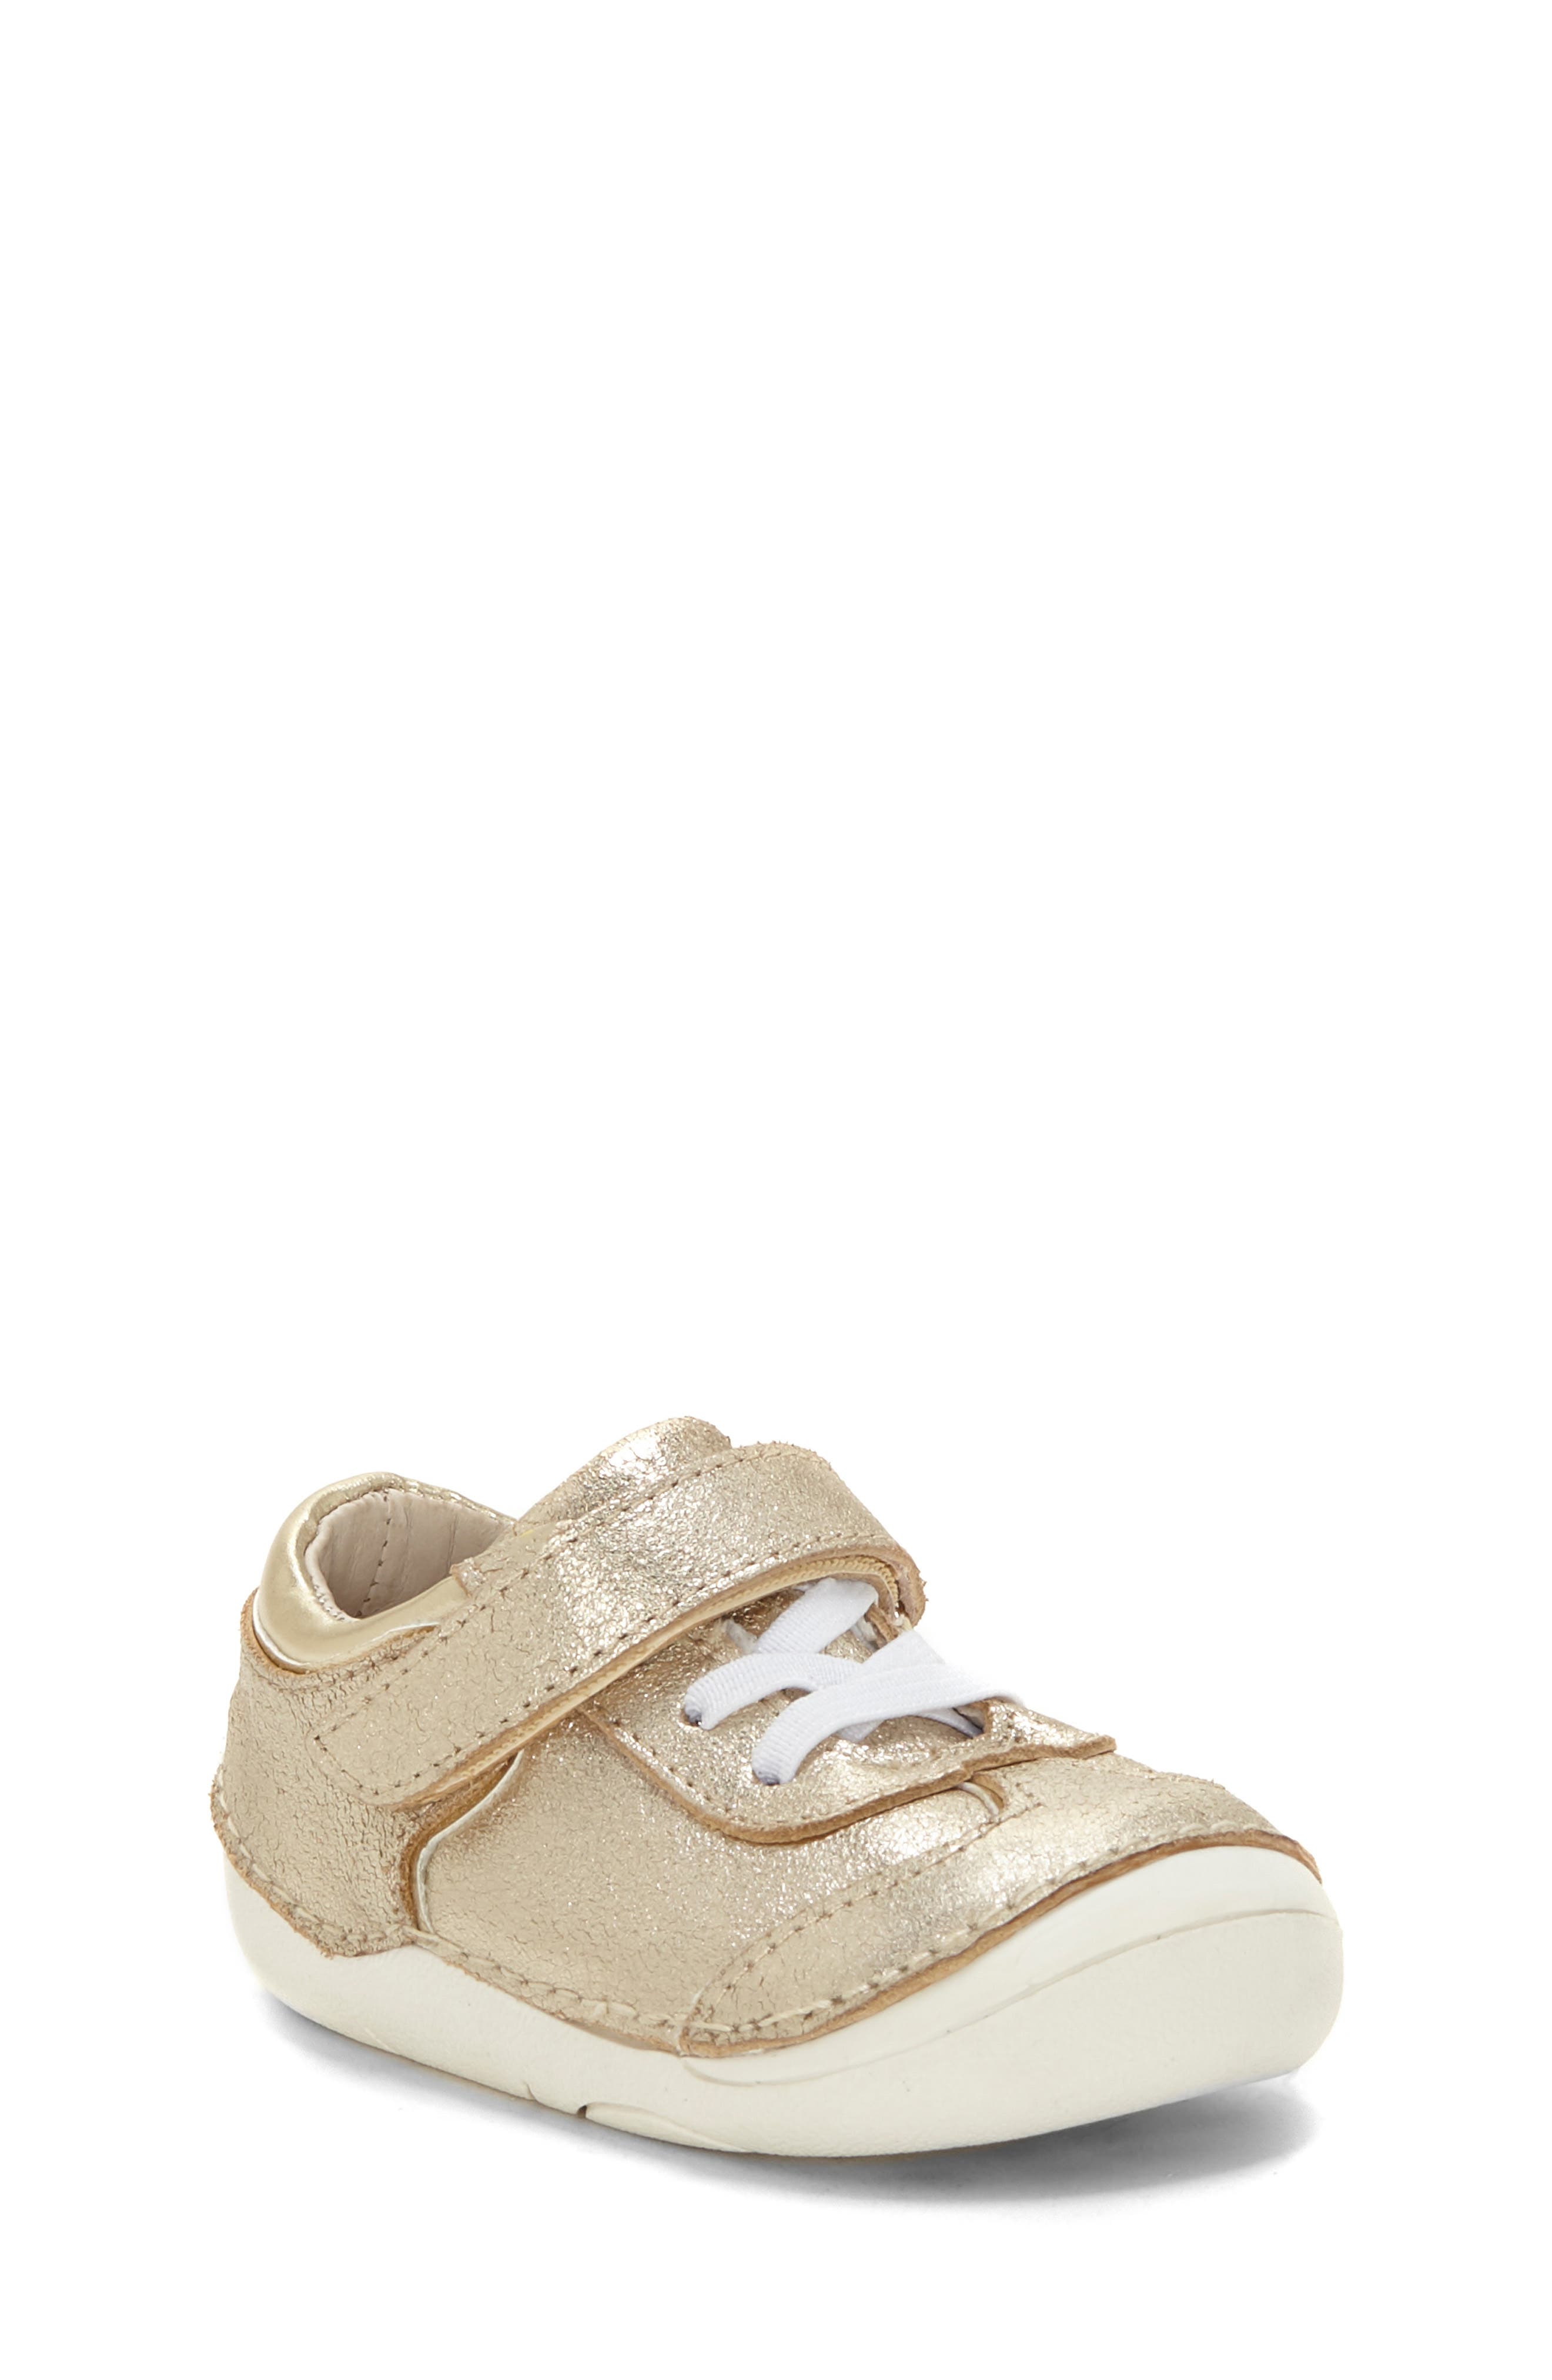 soleplay baby shoes